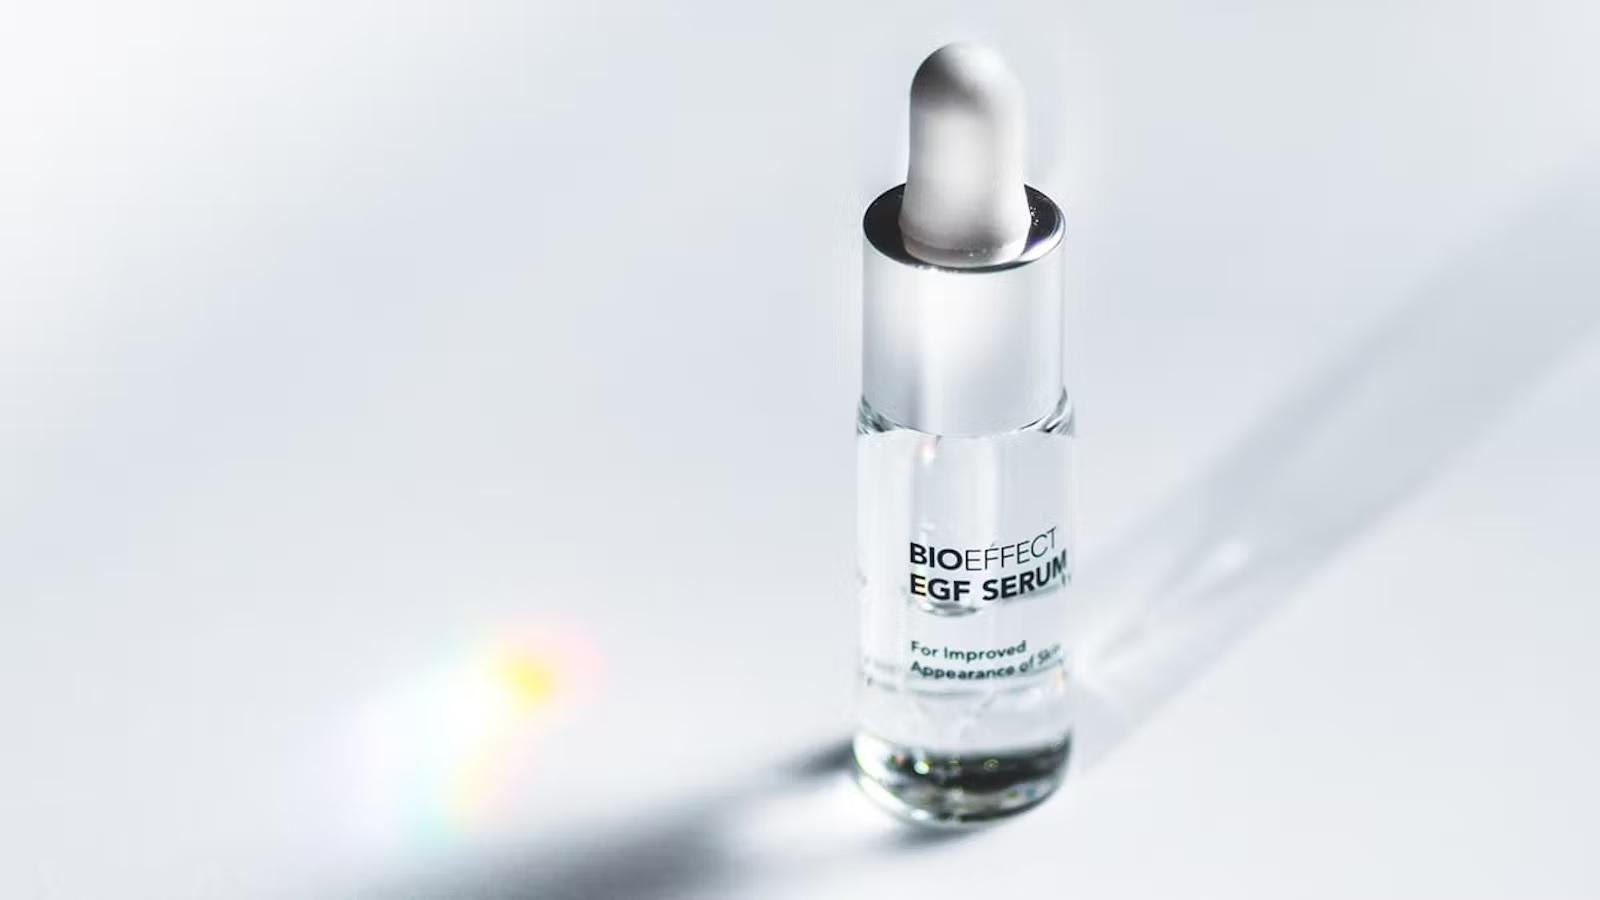 Everything You Need to Know About BIOEFFECT EGF Serum